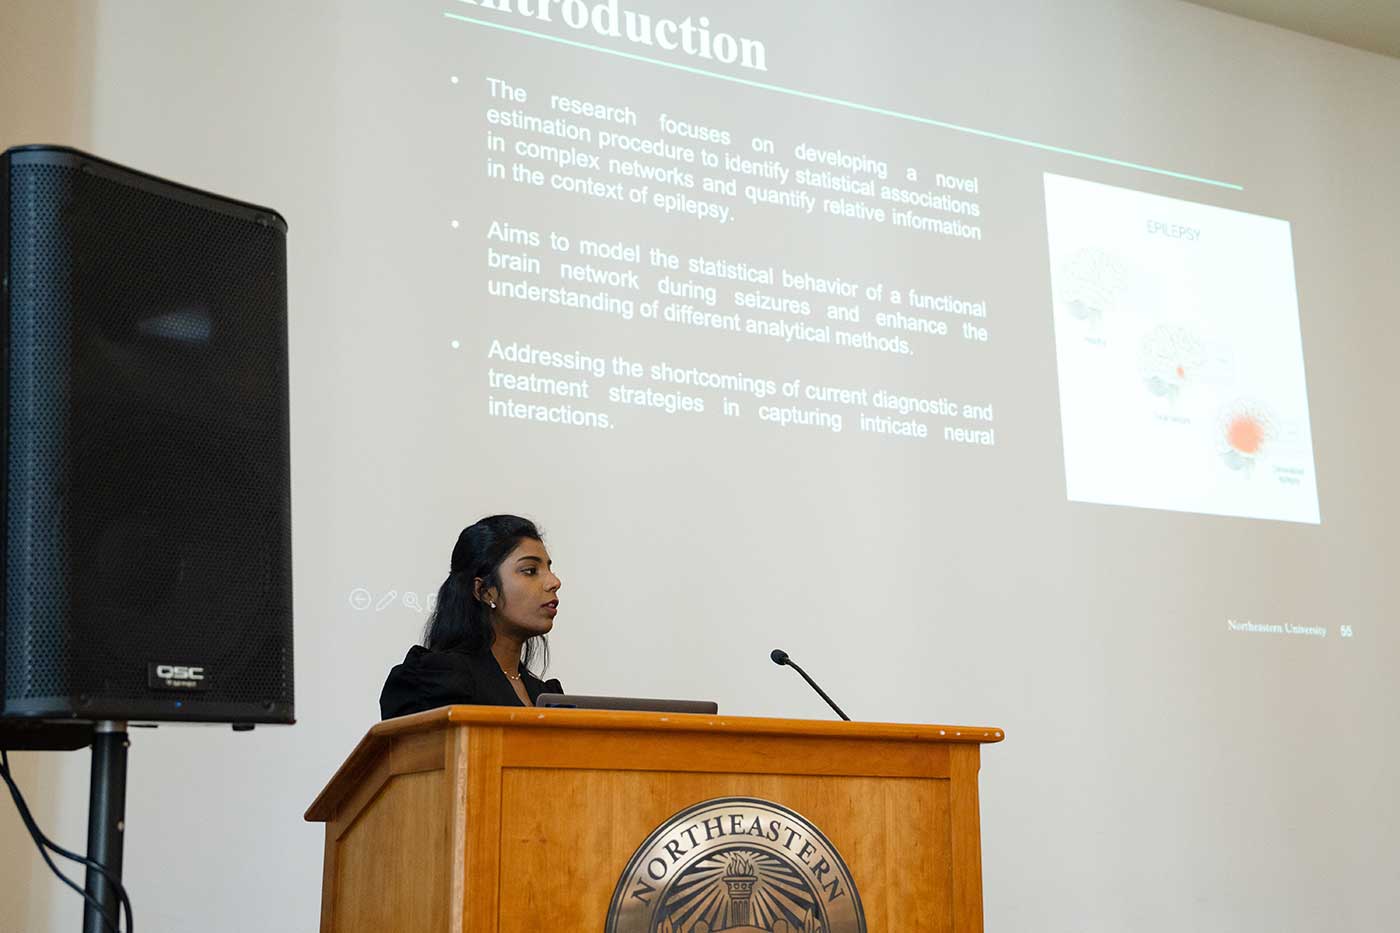 Divyadharshini Muruganandham presents a project while standing behind a podium, with the projection screen visible in the background